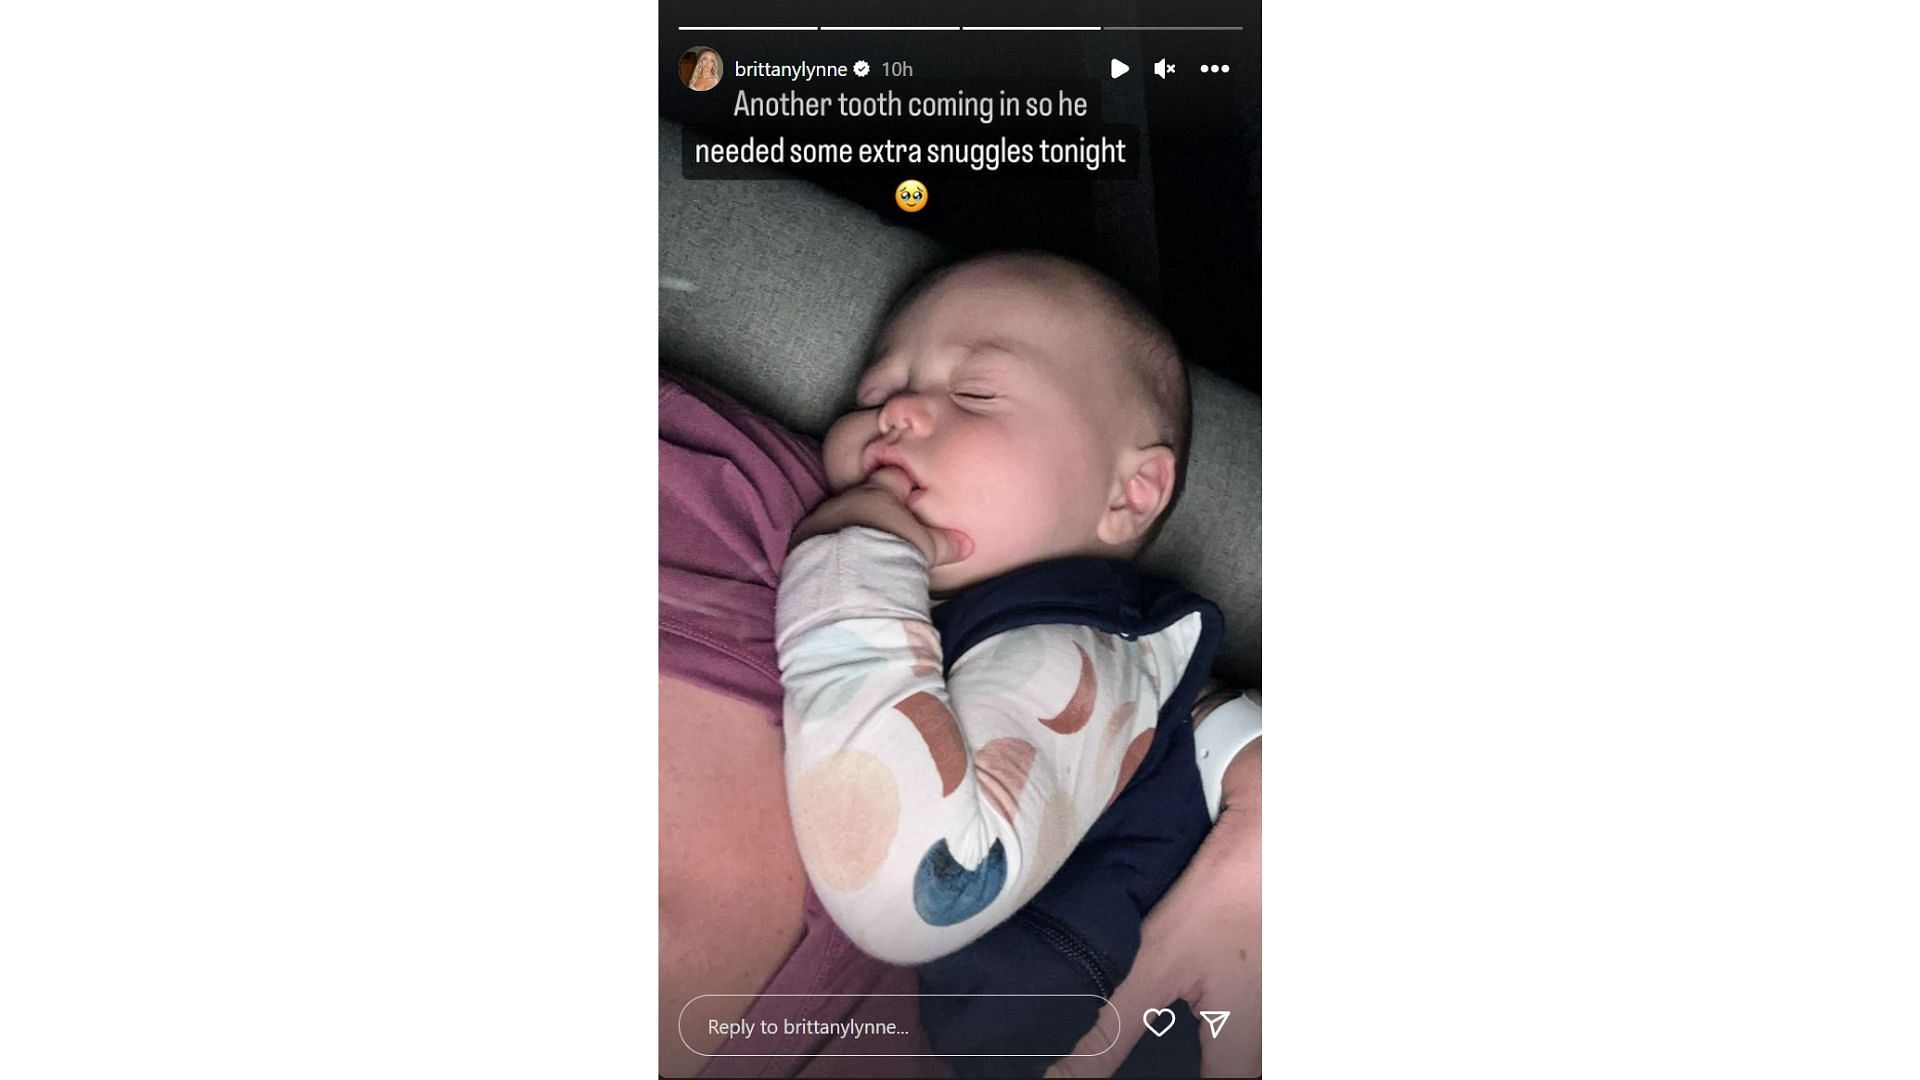 Brittany and Patrick Mahomes Rush Their Infant Son to Emergency